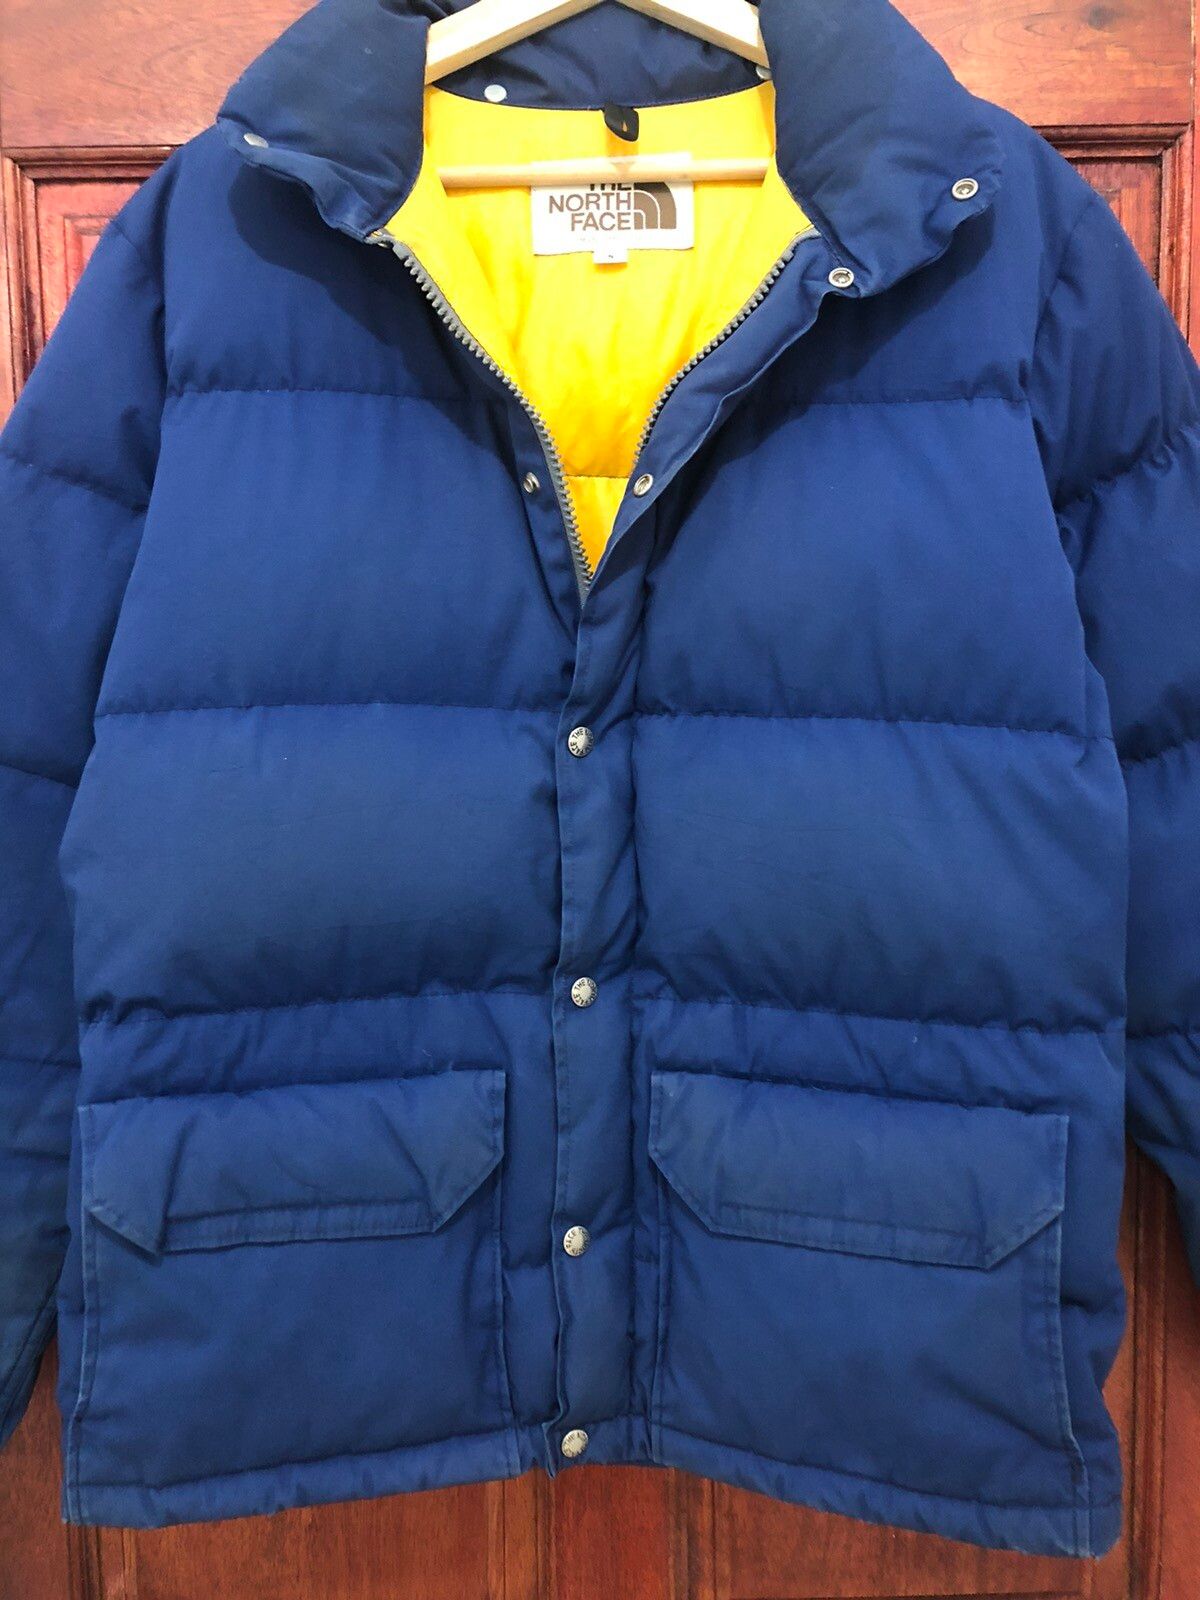 Vintage 90s The North Face Puffer Jacket - 6